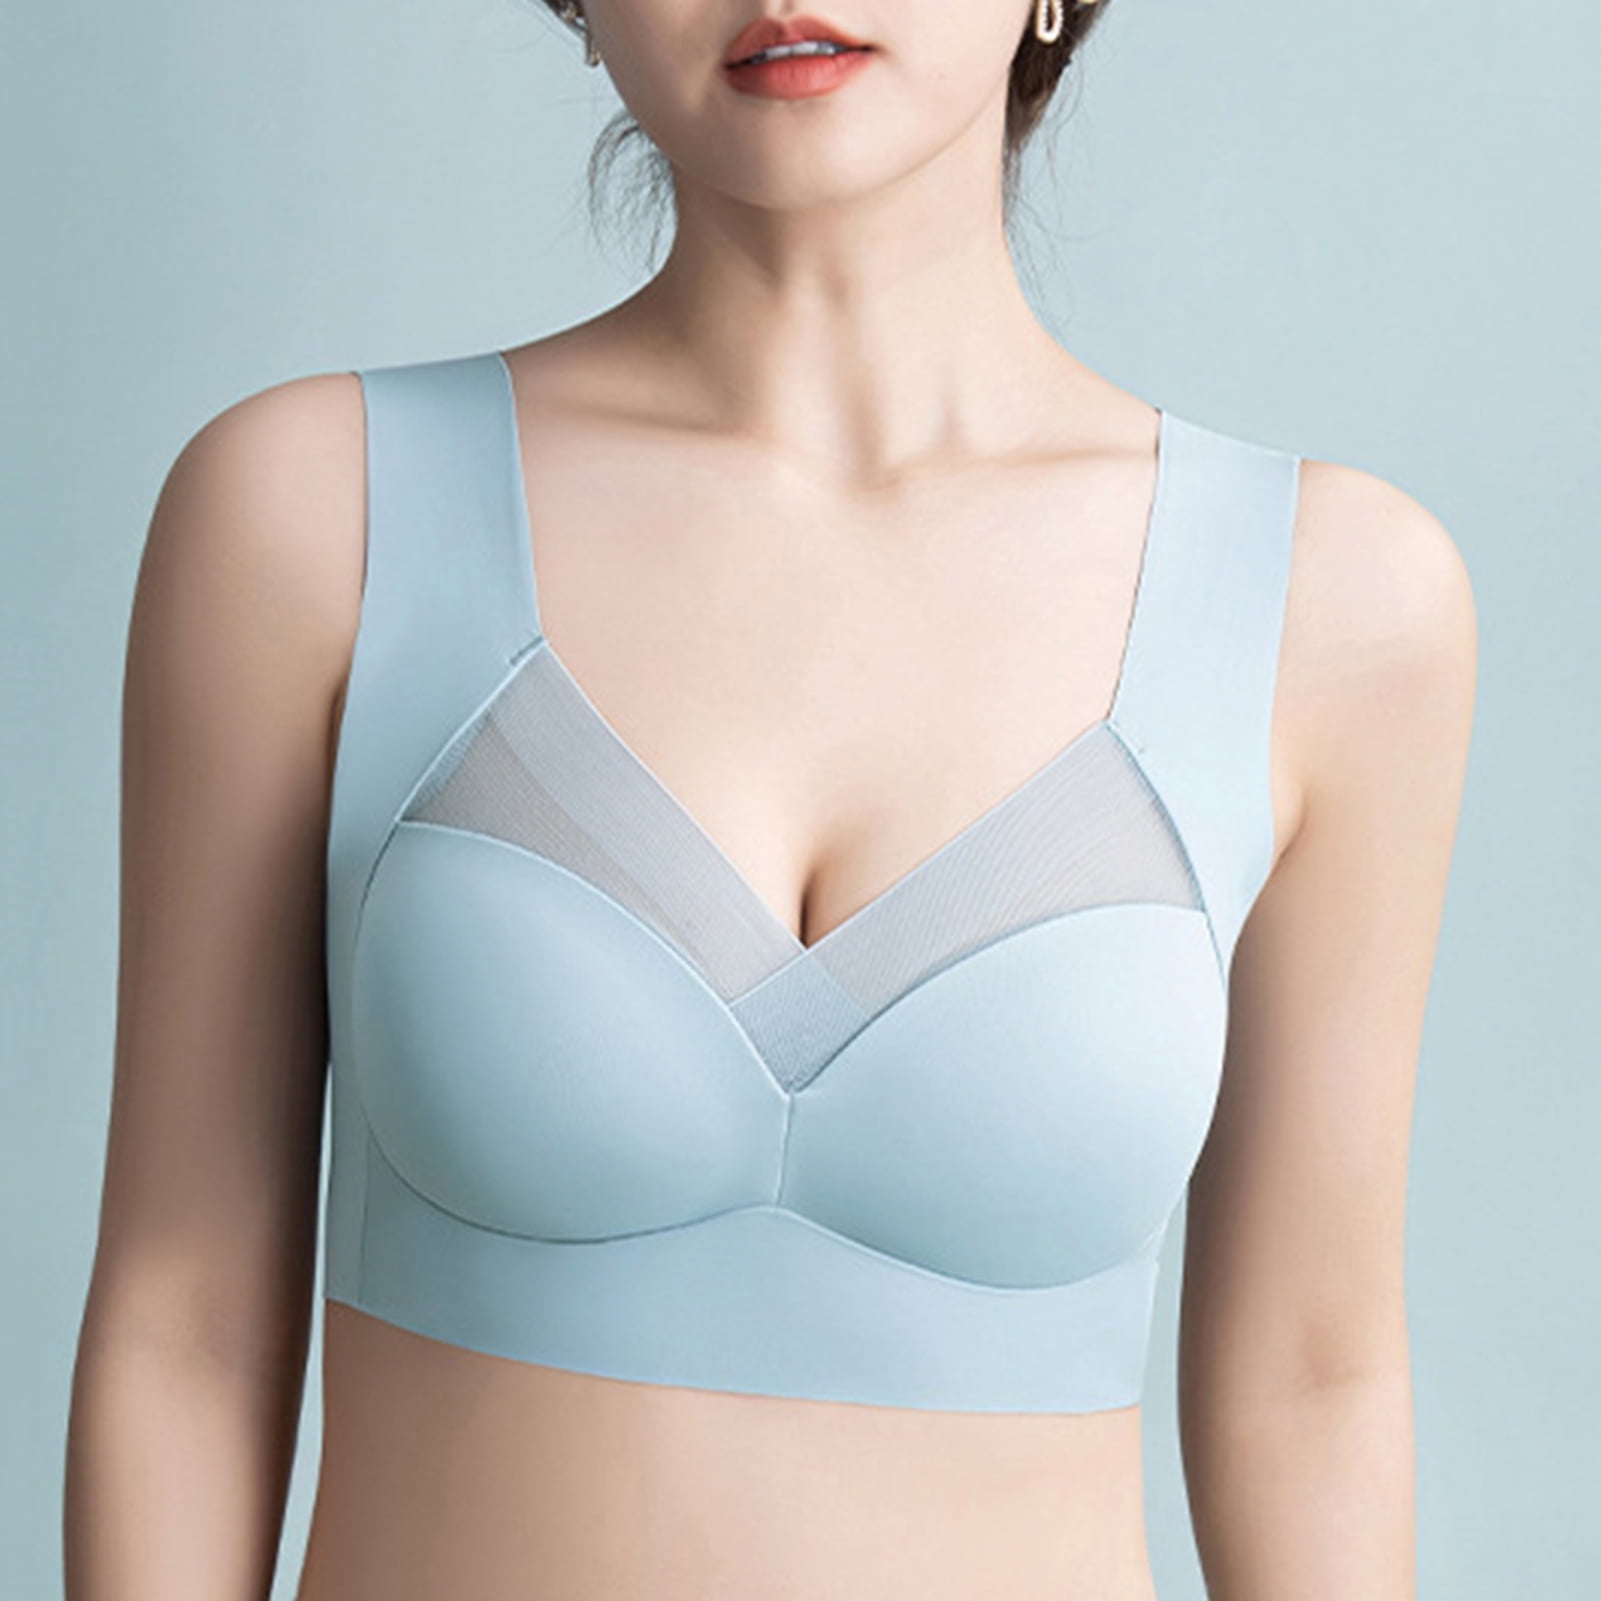 harmtty Lady Bra Push Up Seamless Thin Wire Free No Constraint Women  Brassieres Daily Wear Clothes,Light Blue,2XL